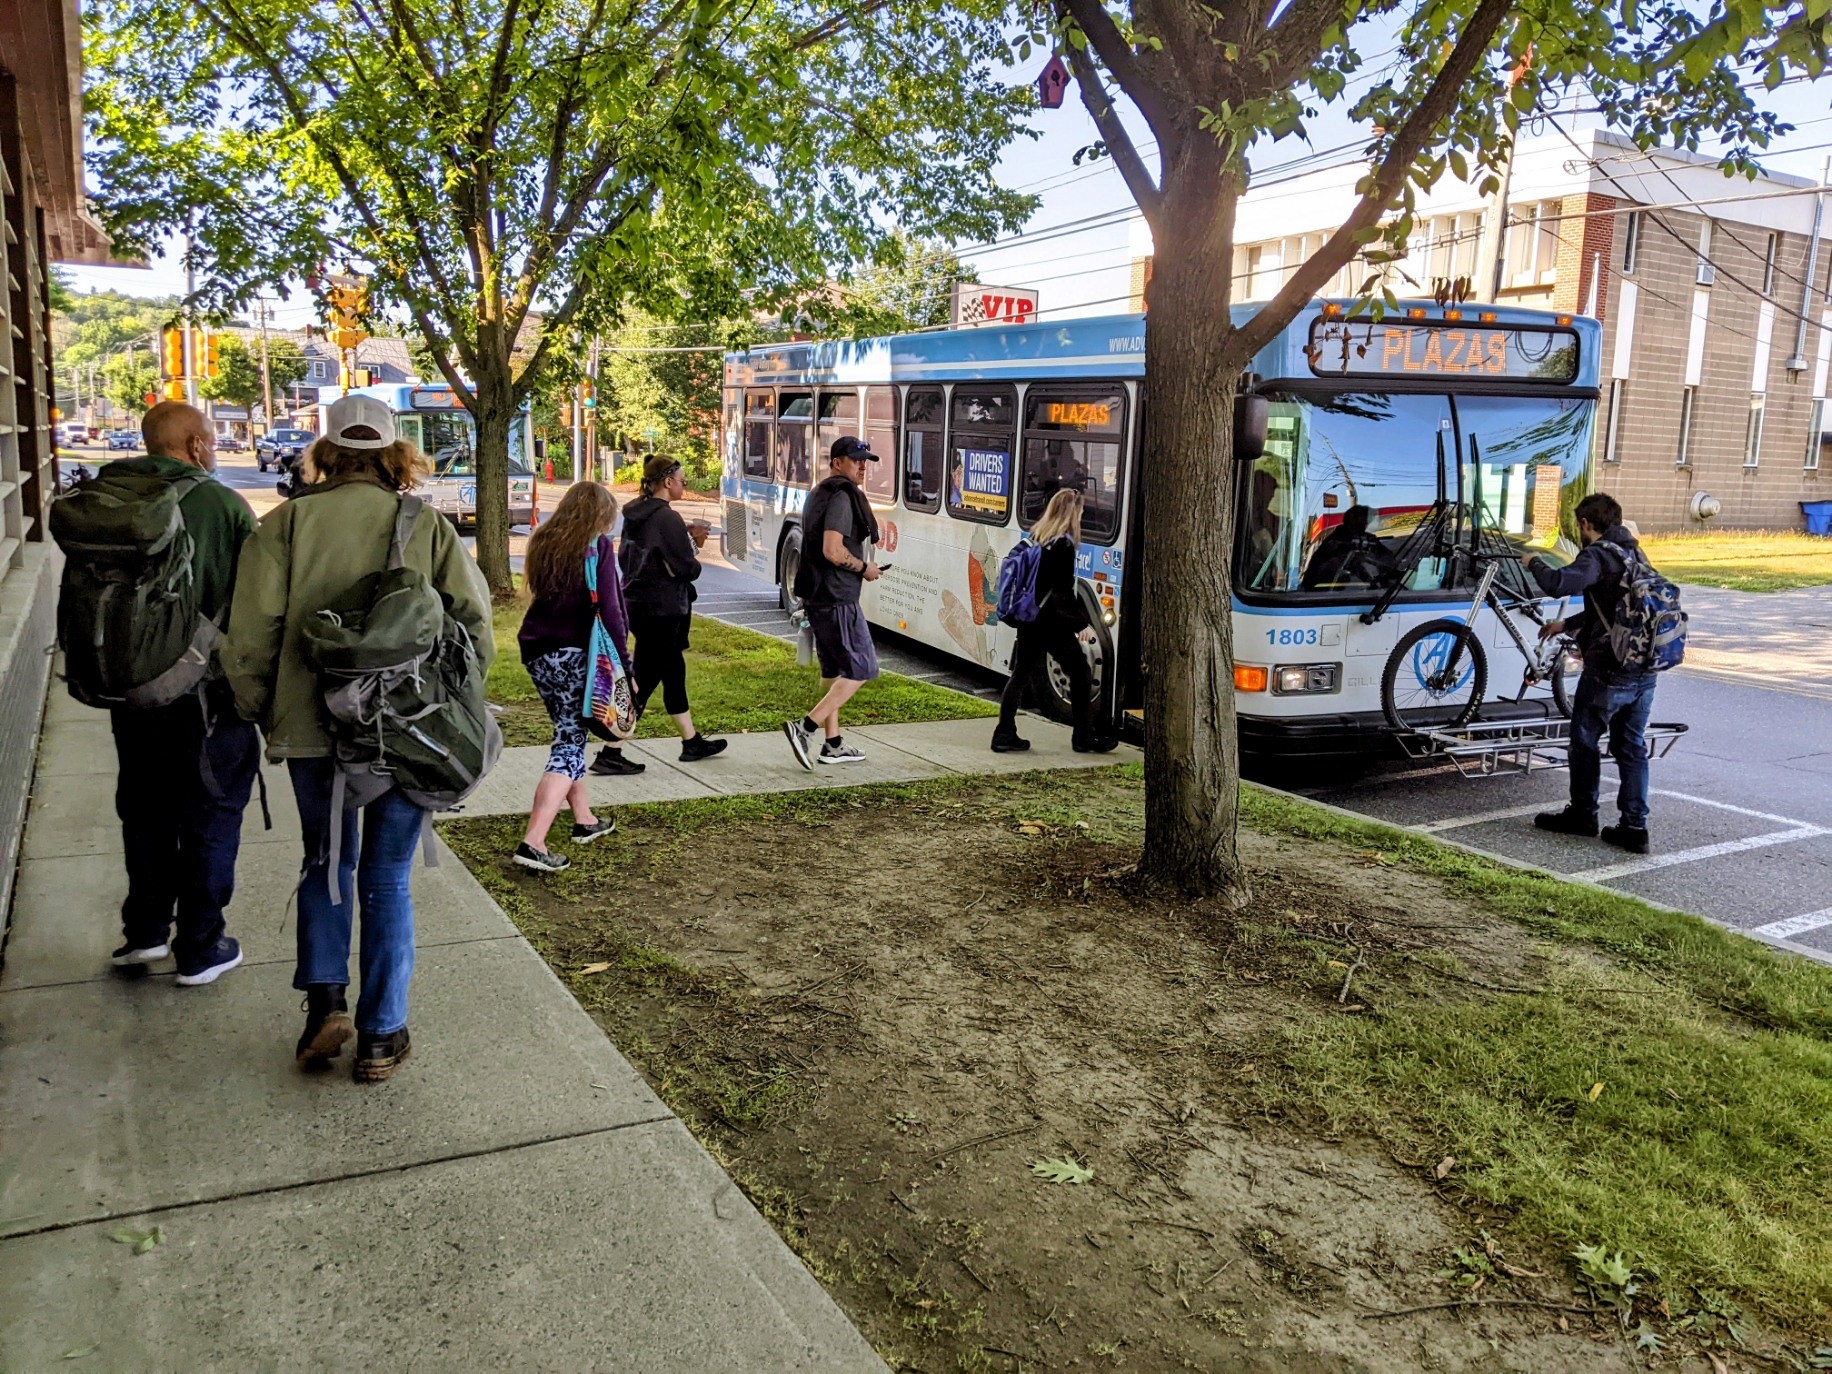 Morning commuters boarding the bus